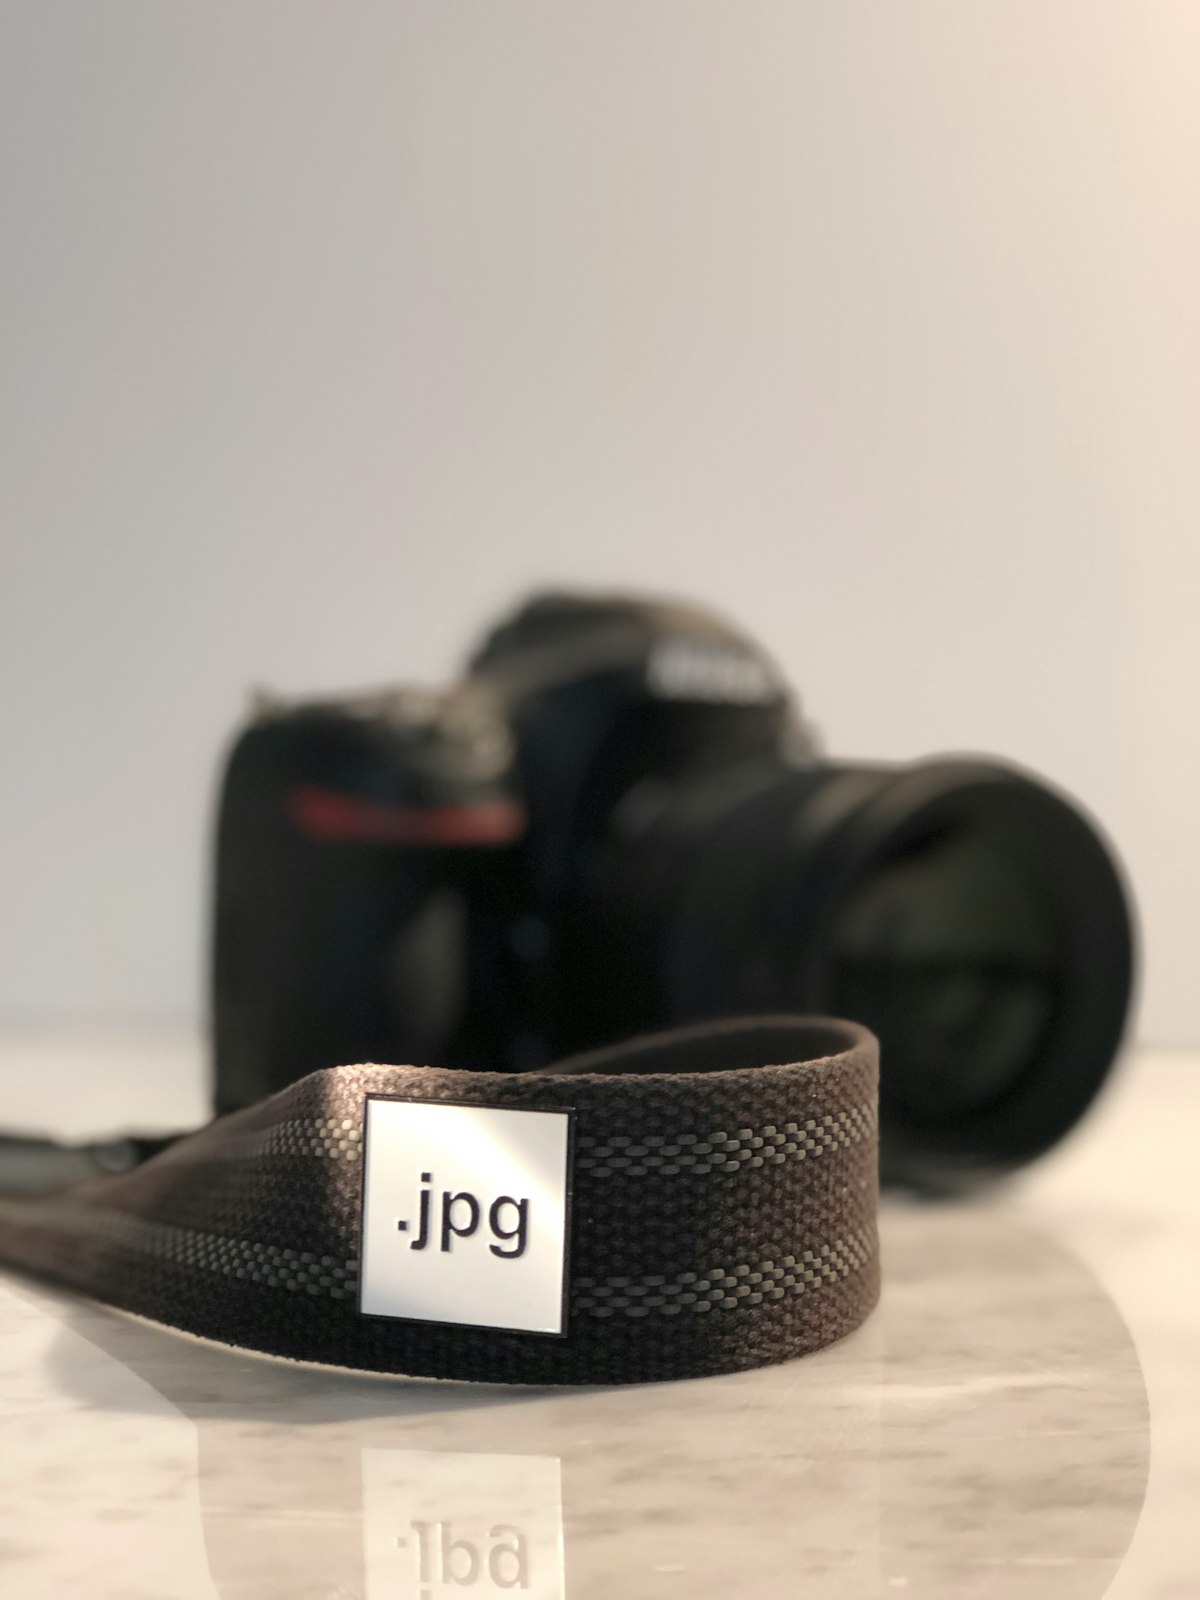 FFmpeg now supports JPEG XL and AVIF: how to convert images